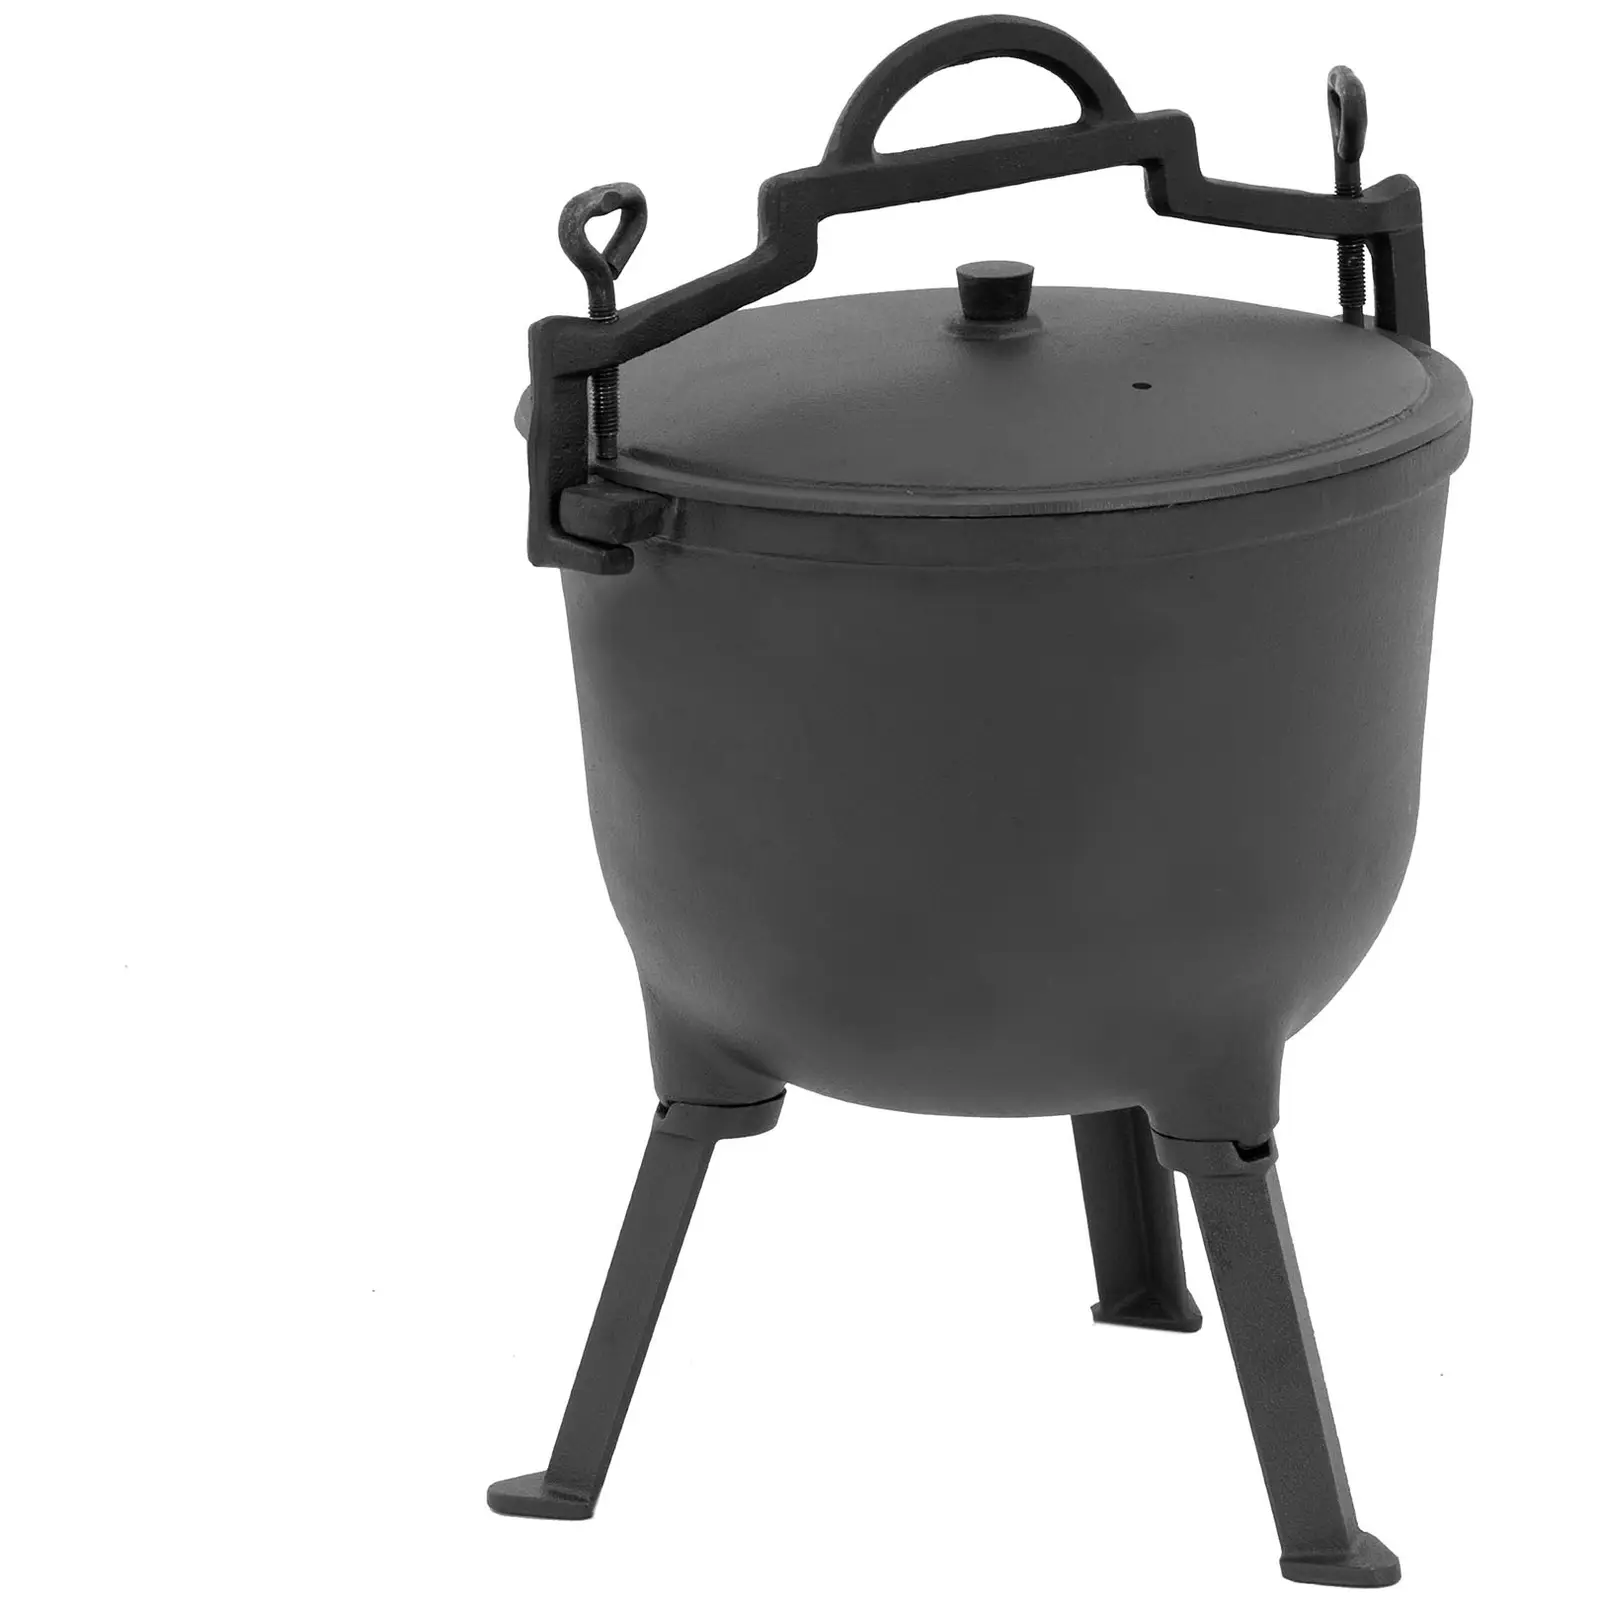 Dutch Oven - With Lid - 10 L - Royal Catering Roaster Cast Iron Pot